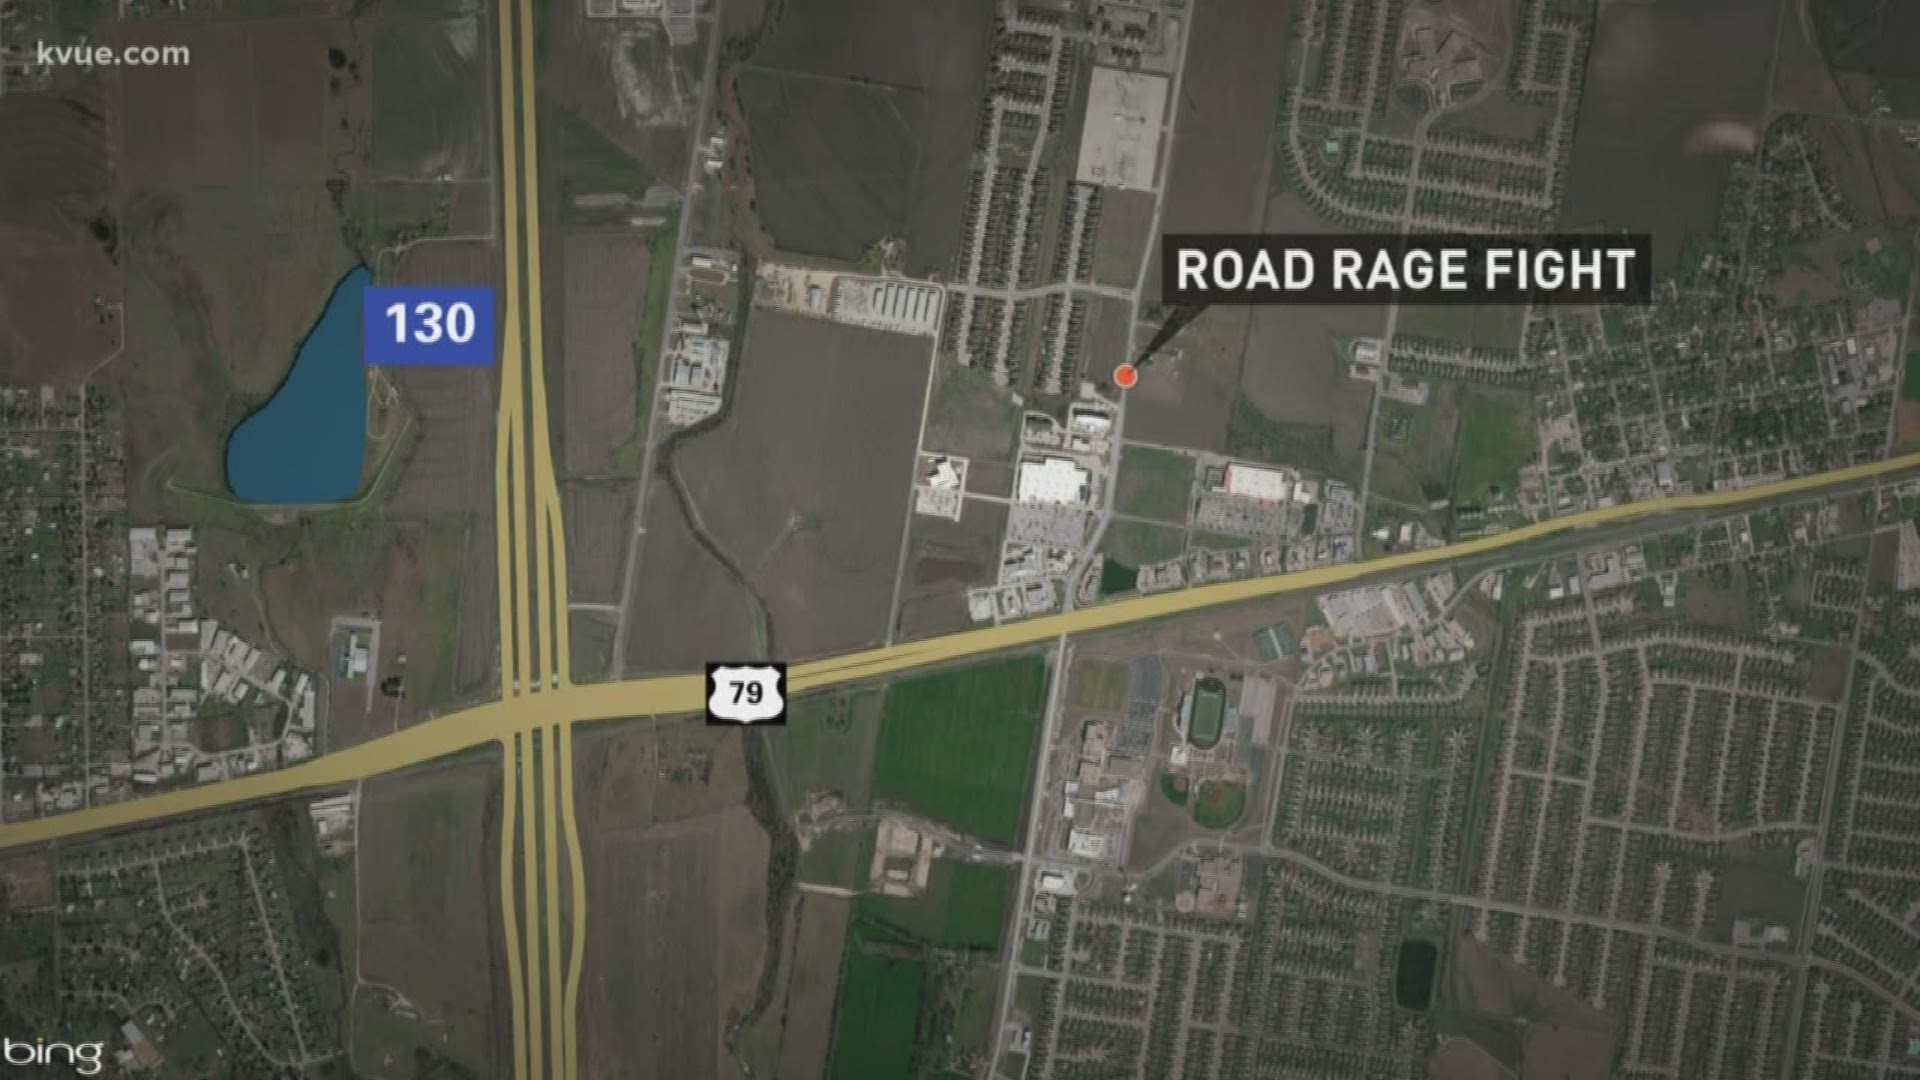 Hutto police say they are investigating a road rage incident, in which shots were fired.